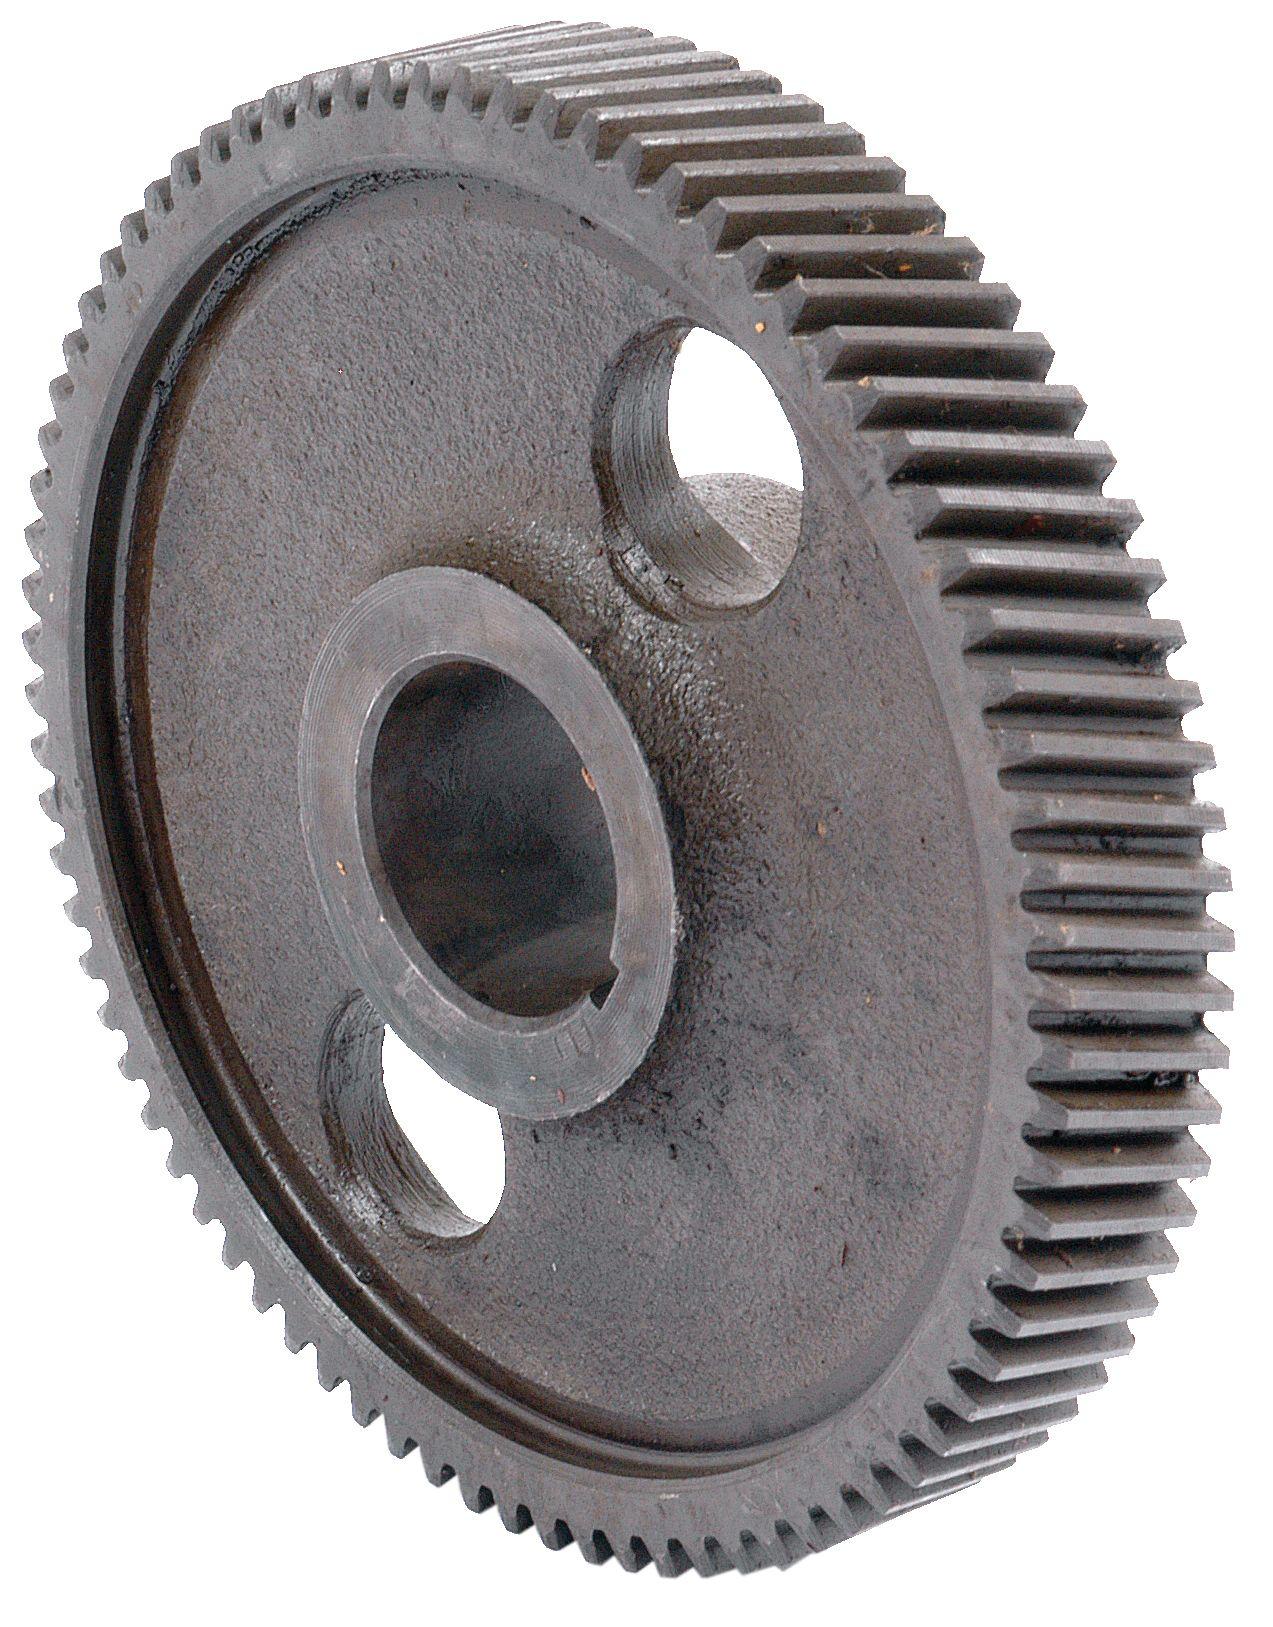 ALLIS CHALMERS TIMING GEAR 59076